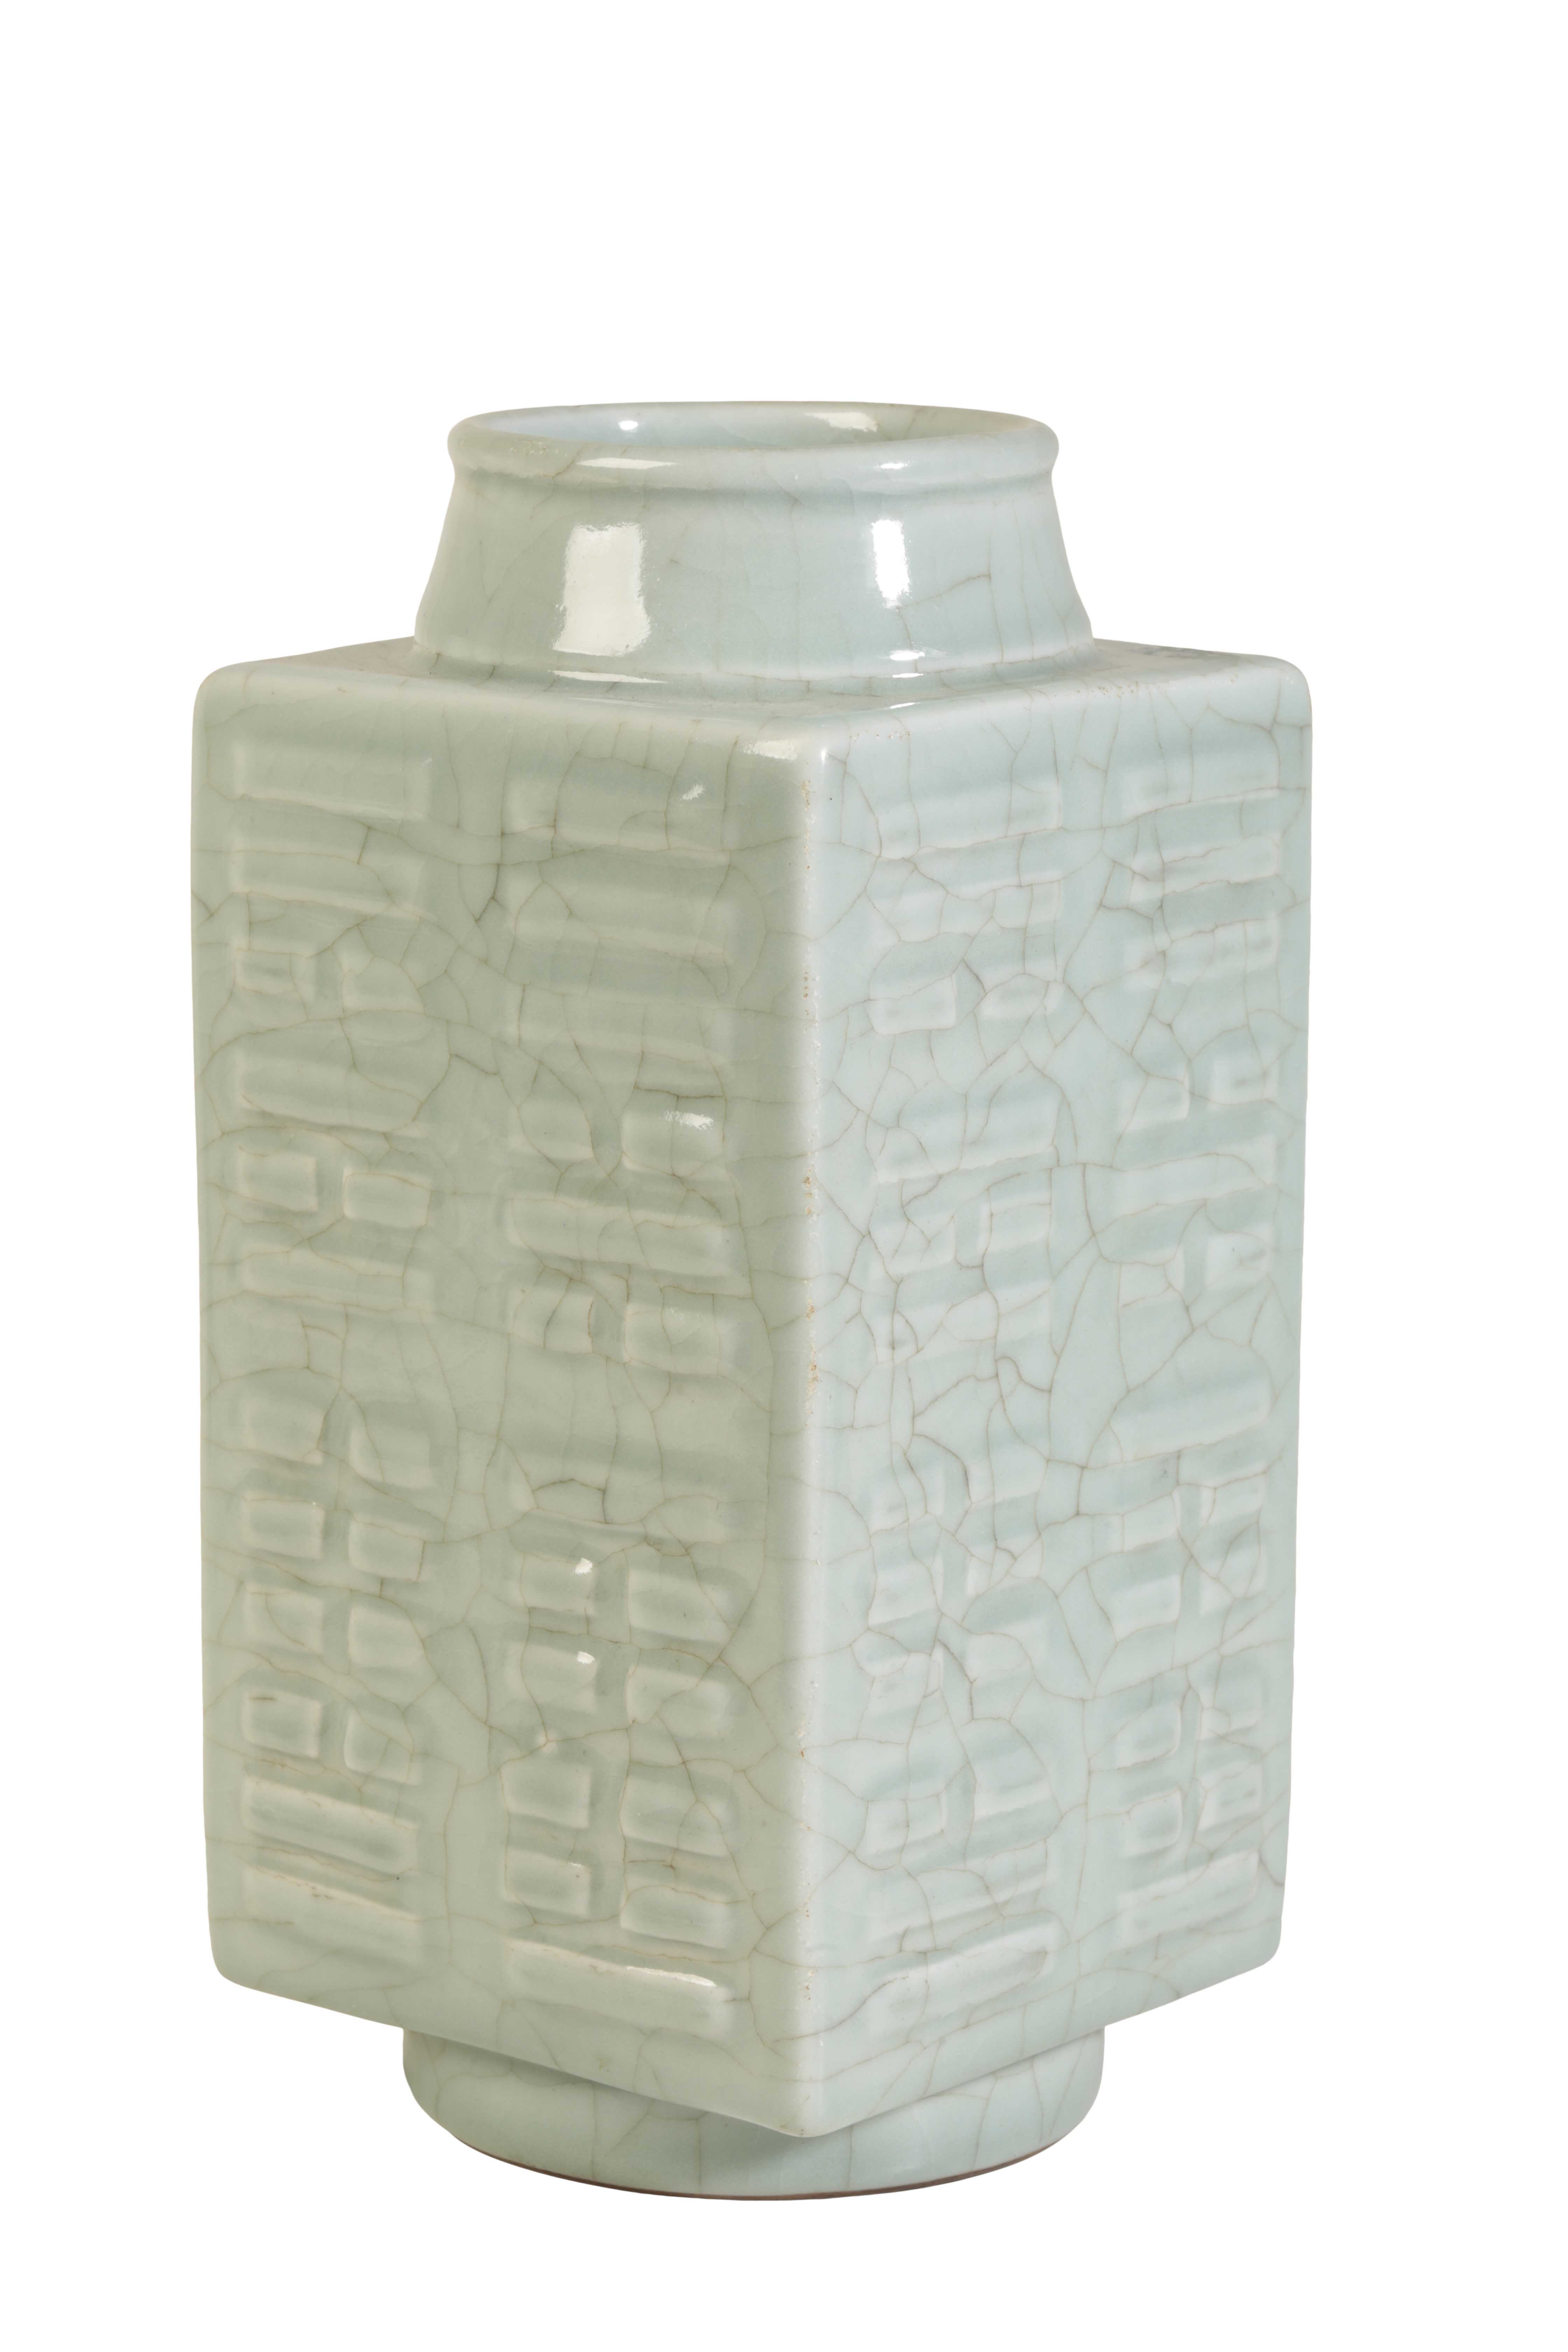 A CHINESE CELADON CONG VASE of 3c759e